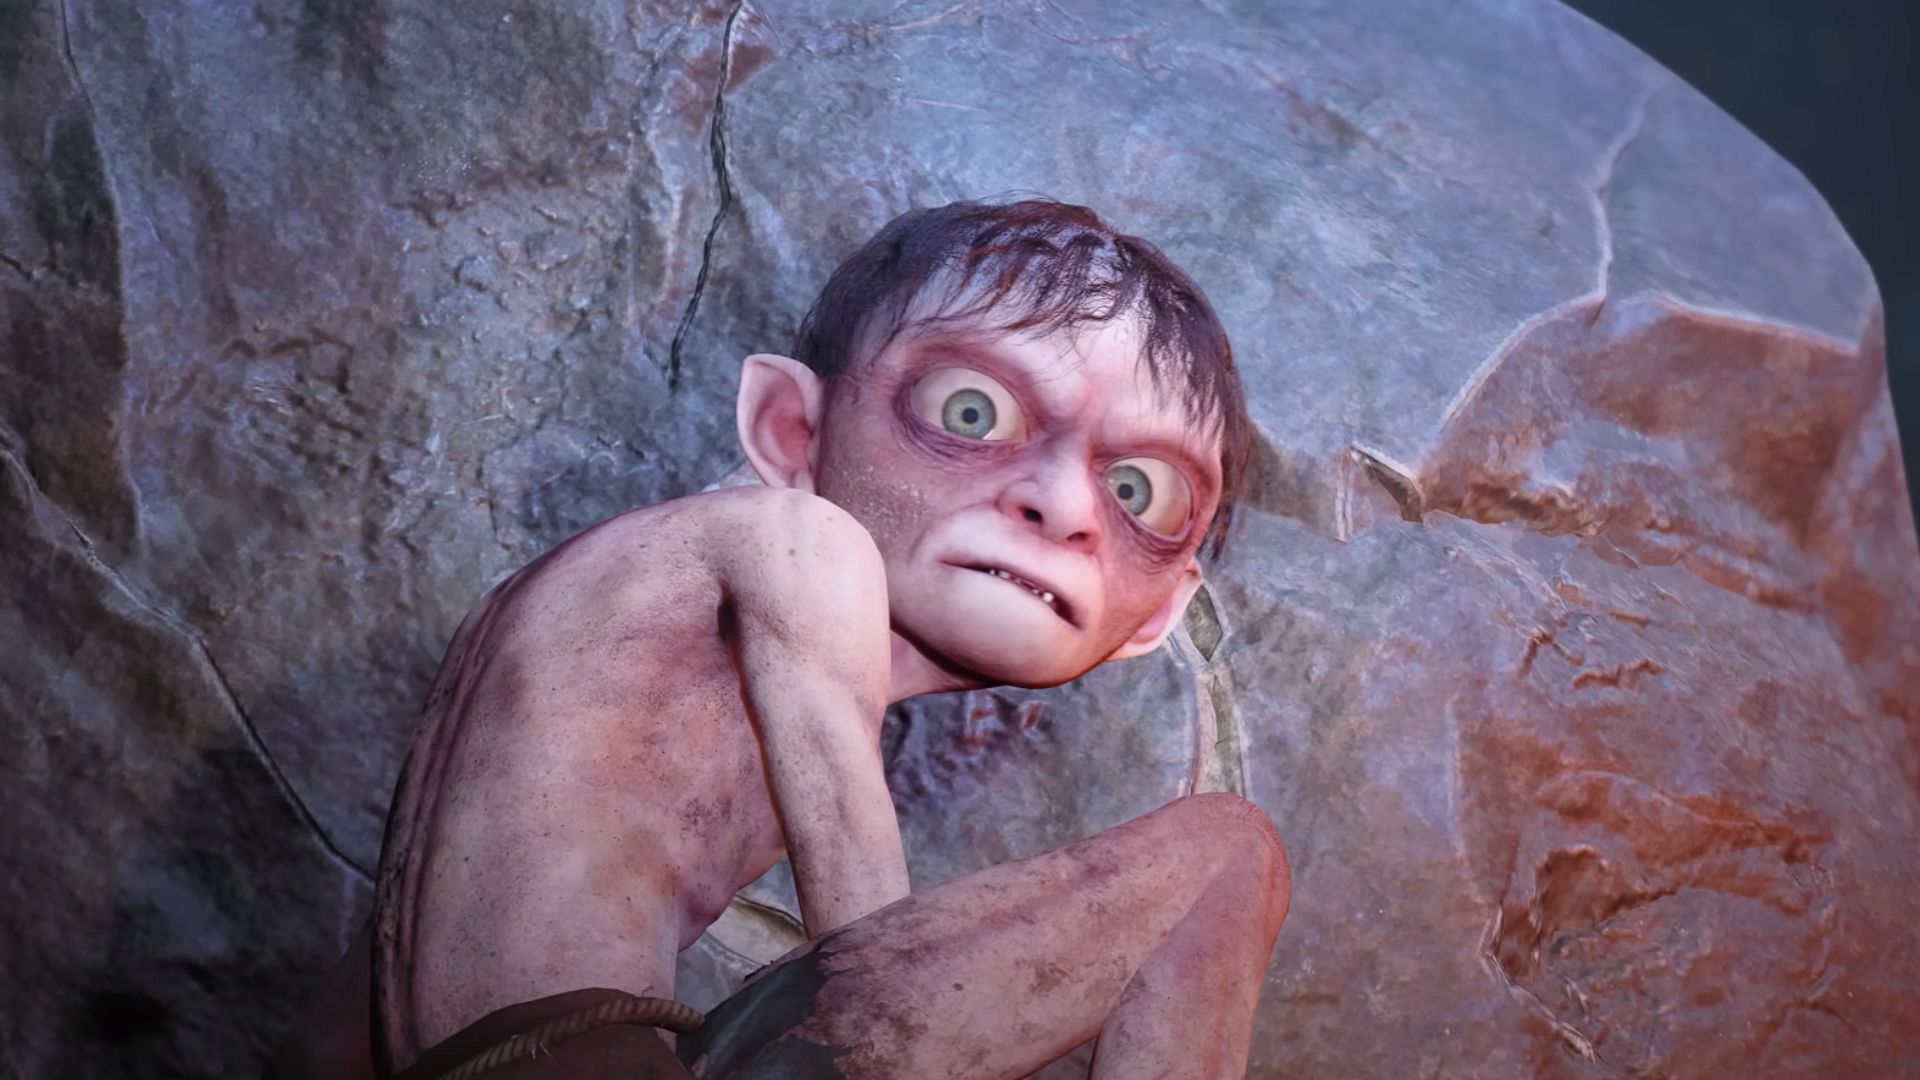 The Lord of the Rings Gollum devs “deeply regret” its dismal reception